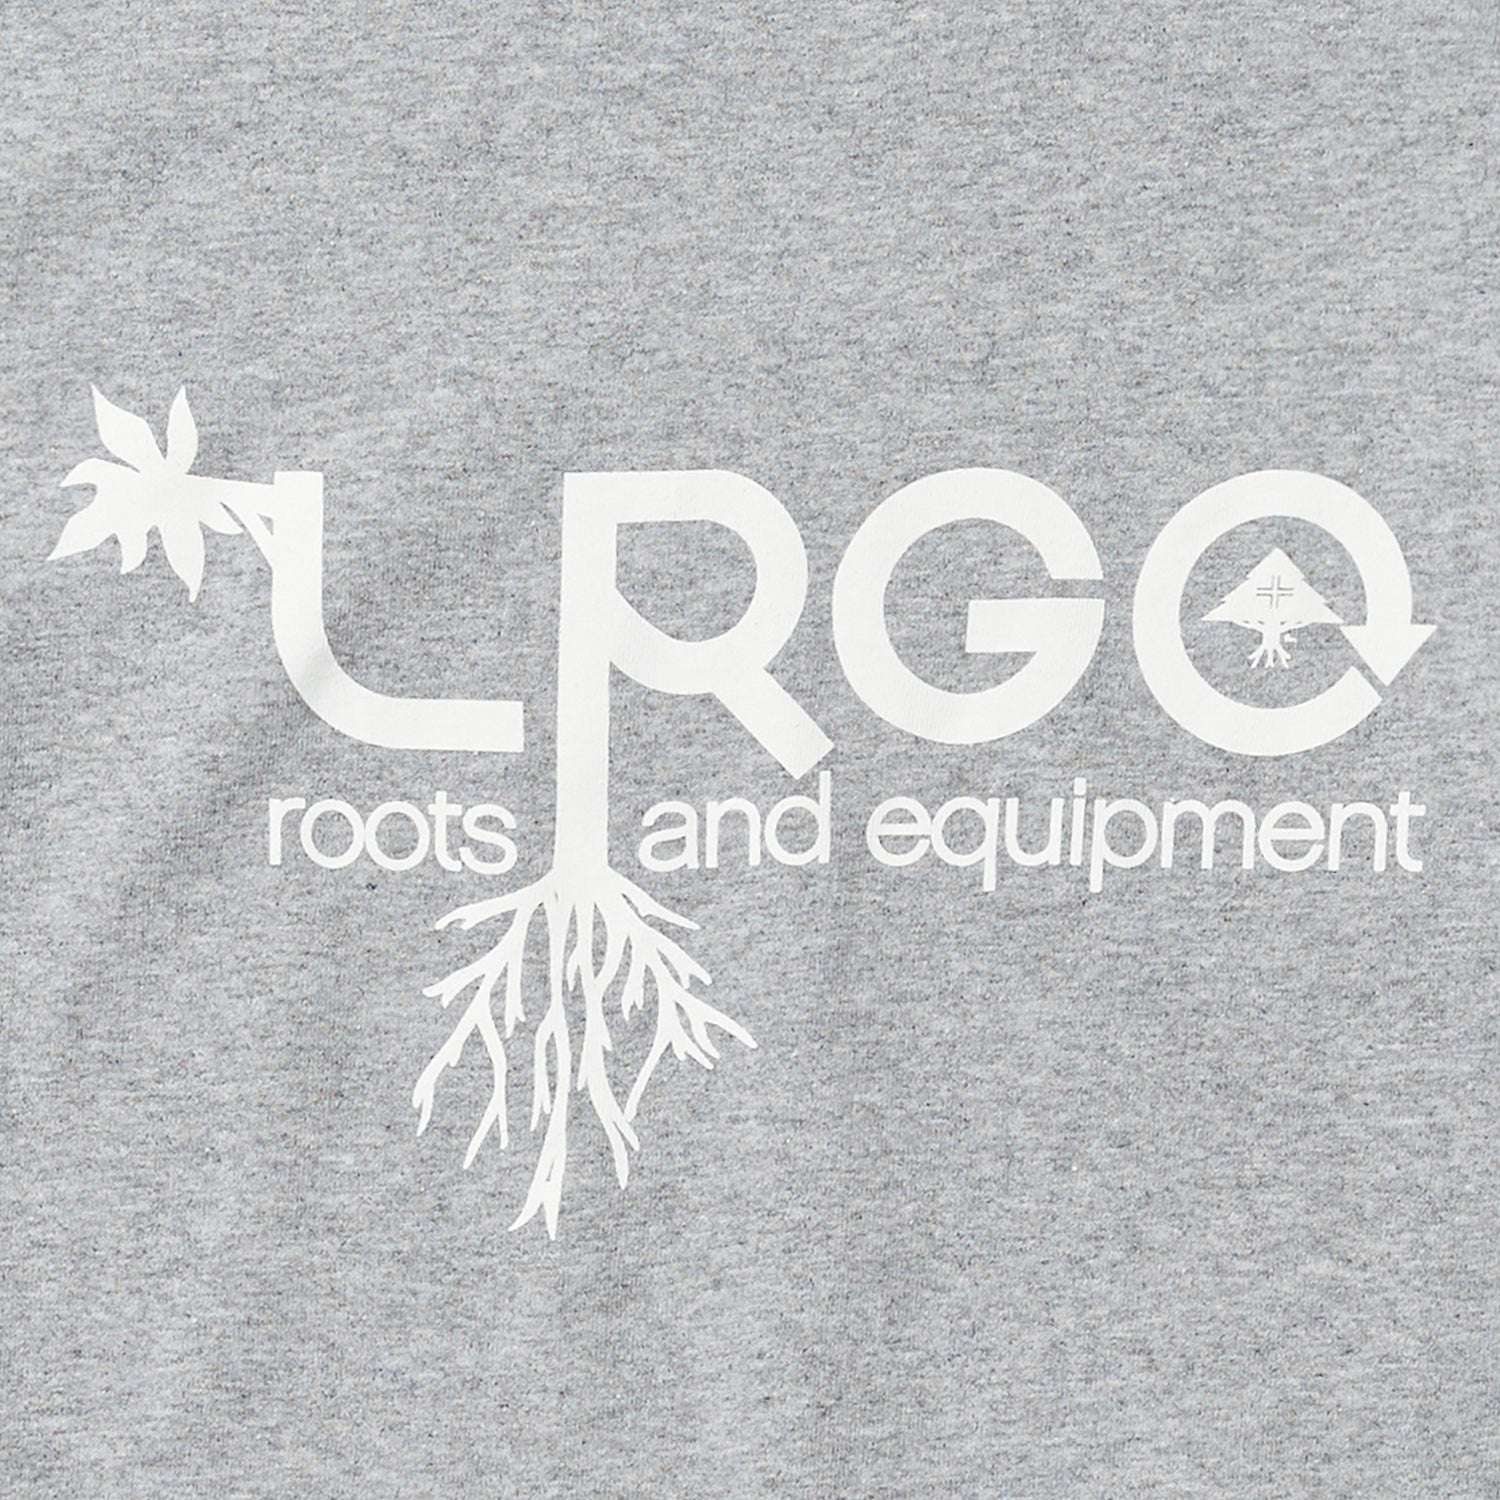 ROOTS AND EQUIPMENT TEE - ATHLETIC HEATHER